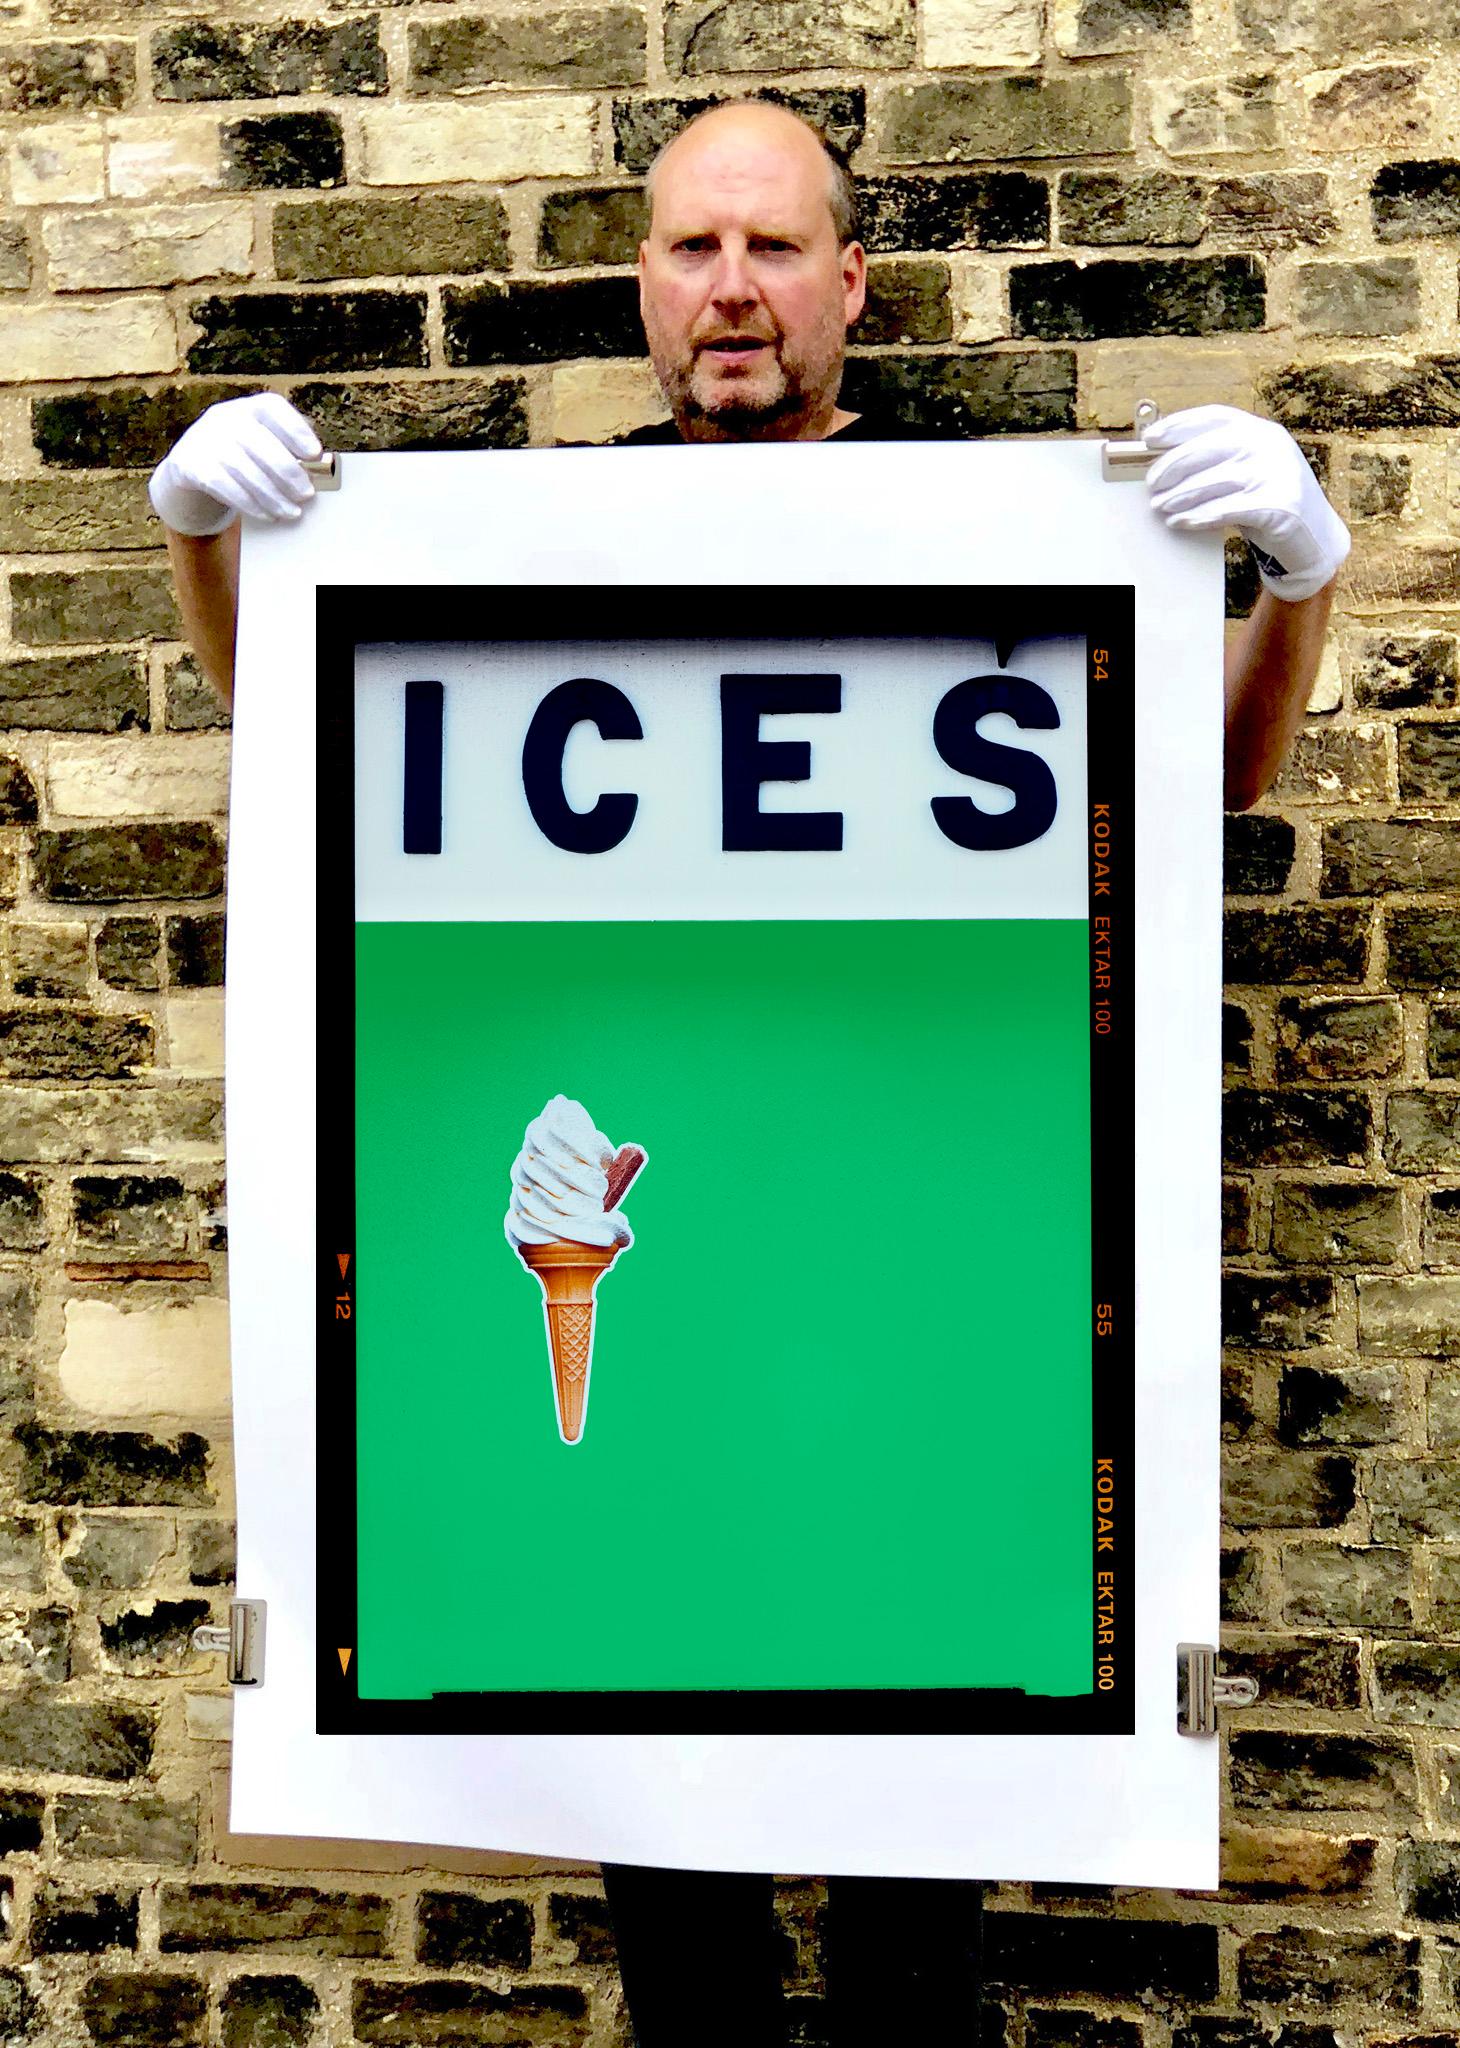 ICES (Green), Bexhill-on-Sea - British seaside color photography - Photograph by Richard Heeps